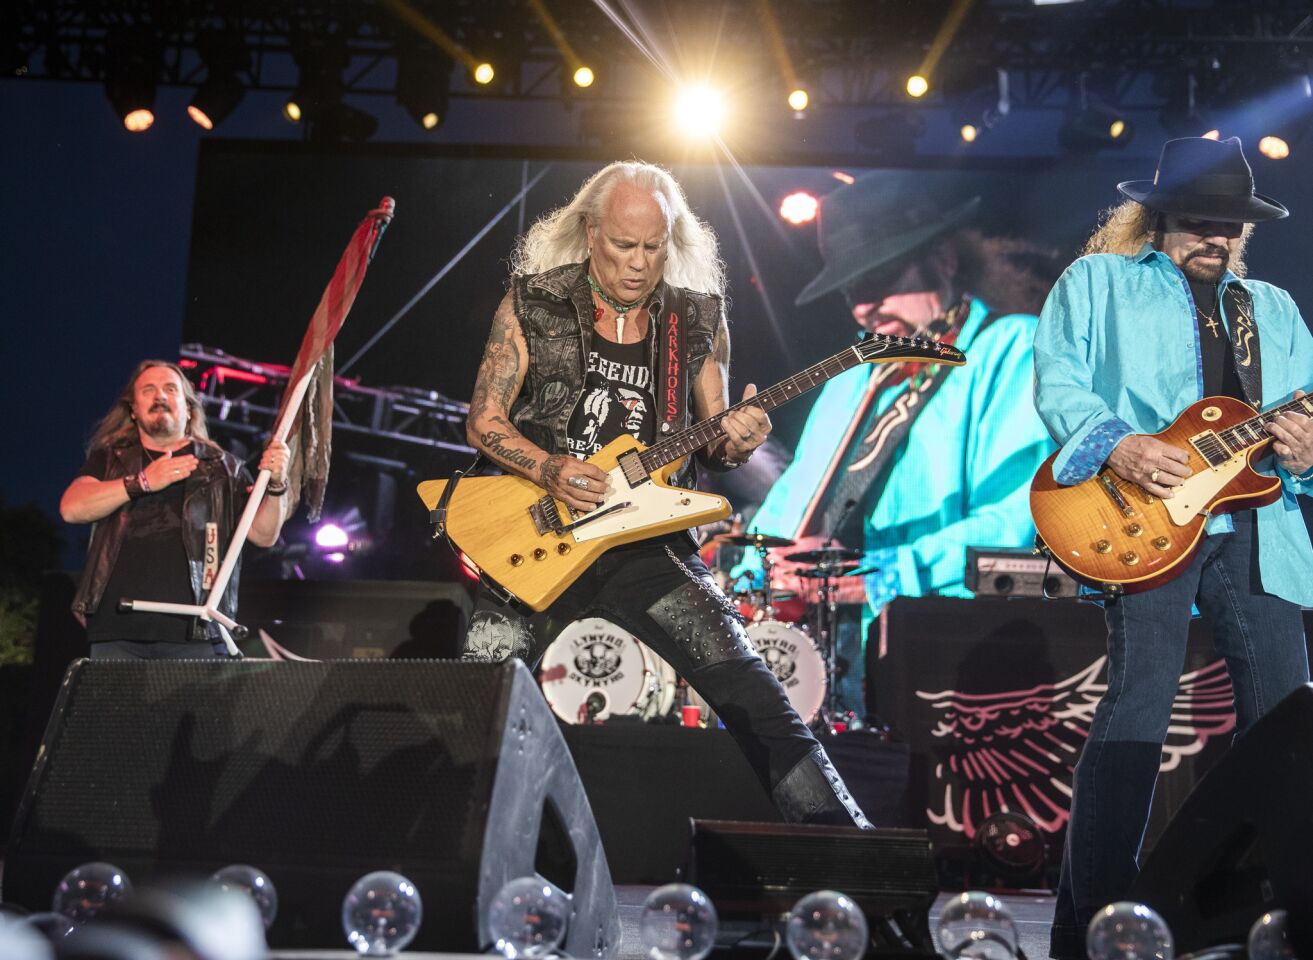 Lynyrd Skynyrd vocalist Johnny Van Zant, left, and guitarists Rickey Medlocke, center, and Gary Rossington (the band's sole continuous member), perform on the Palomino Stage on the second of the three-day 2019 Stagecoach Country Music Festival, the world's biggest country music festival.